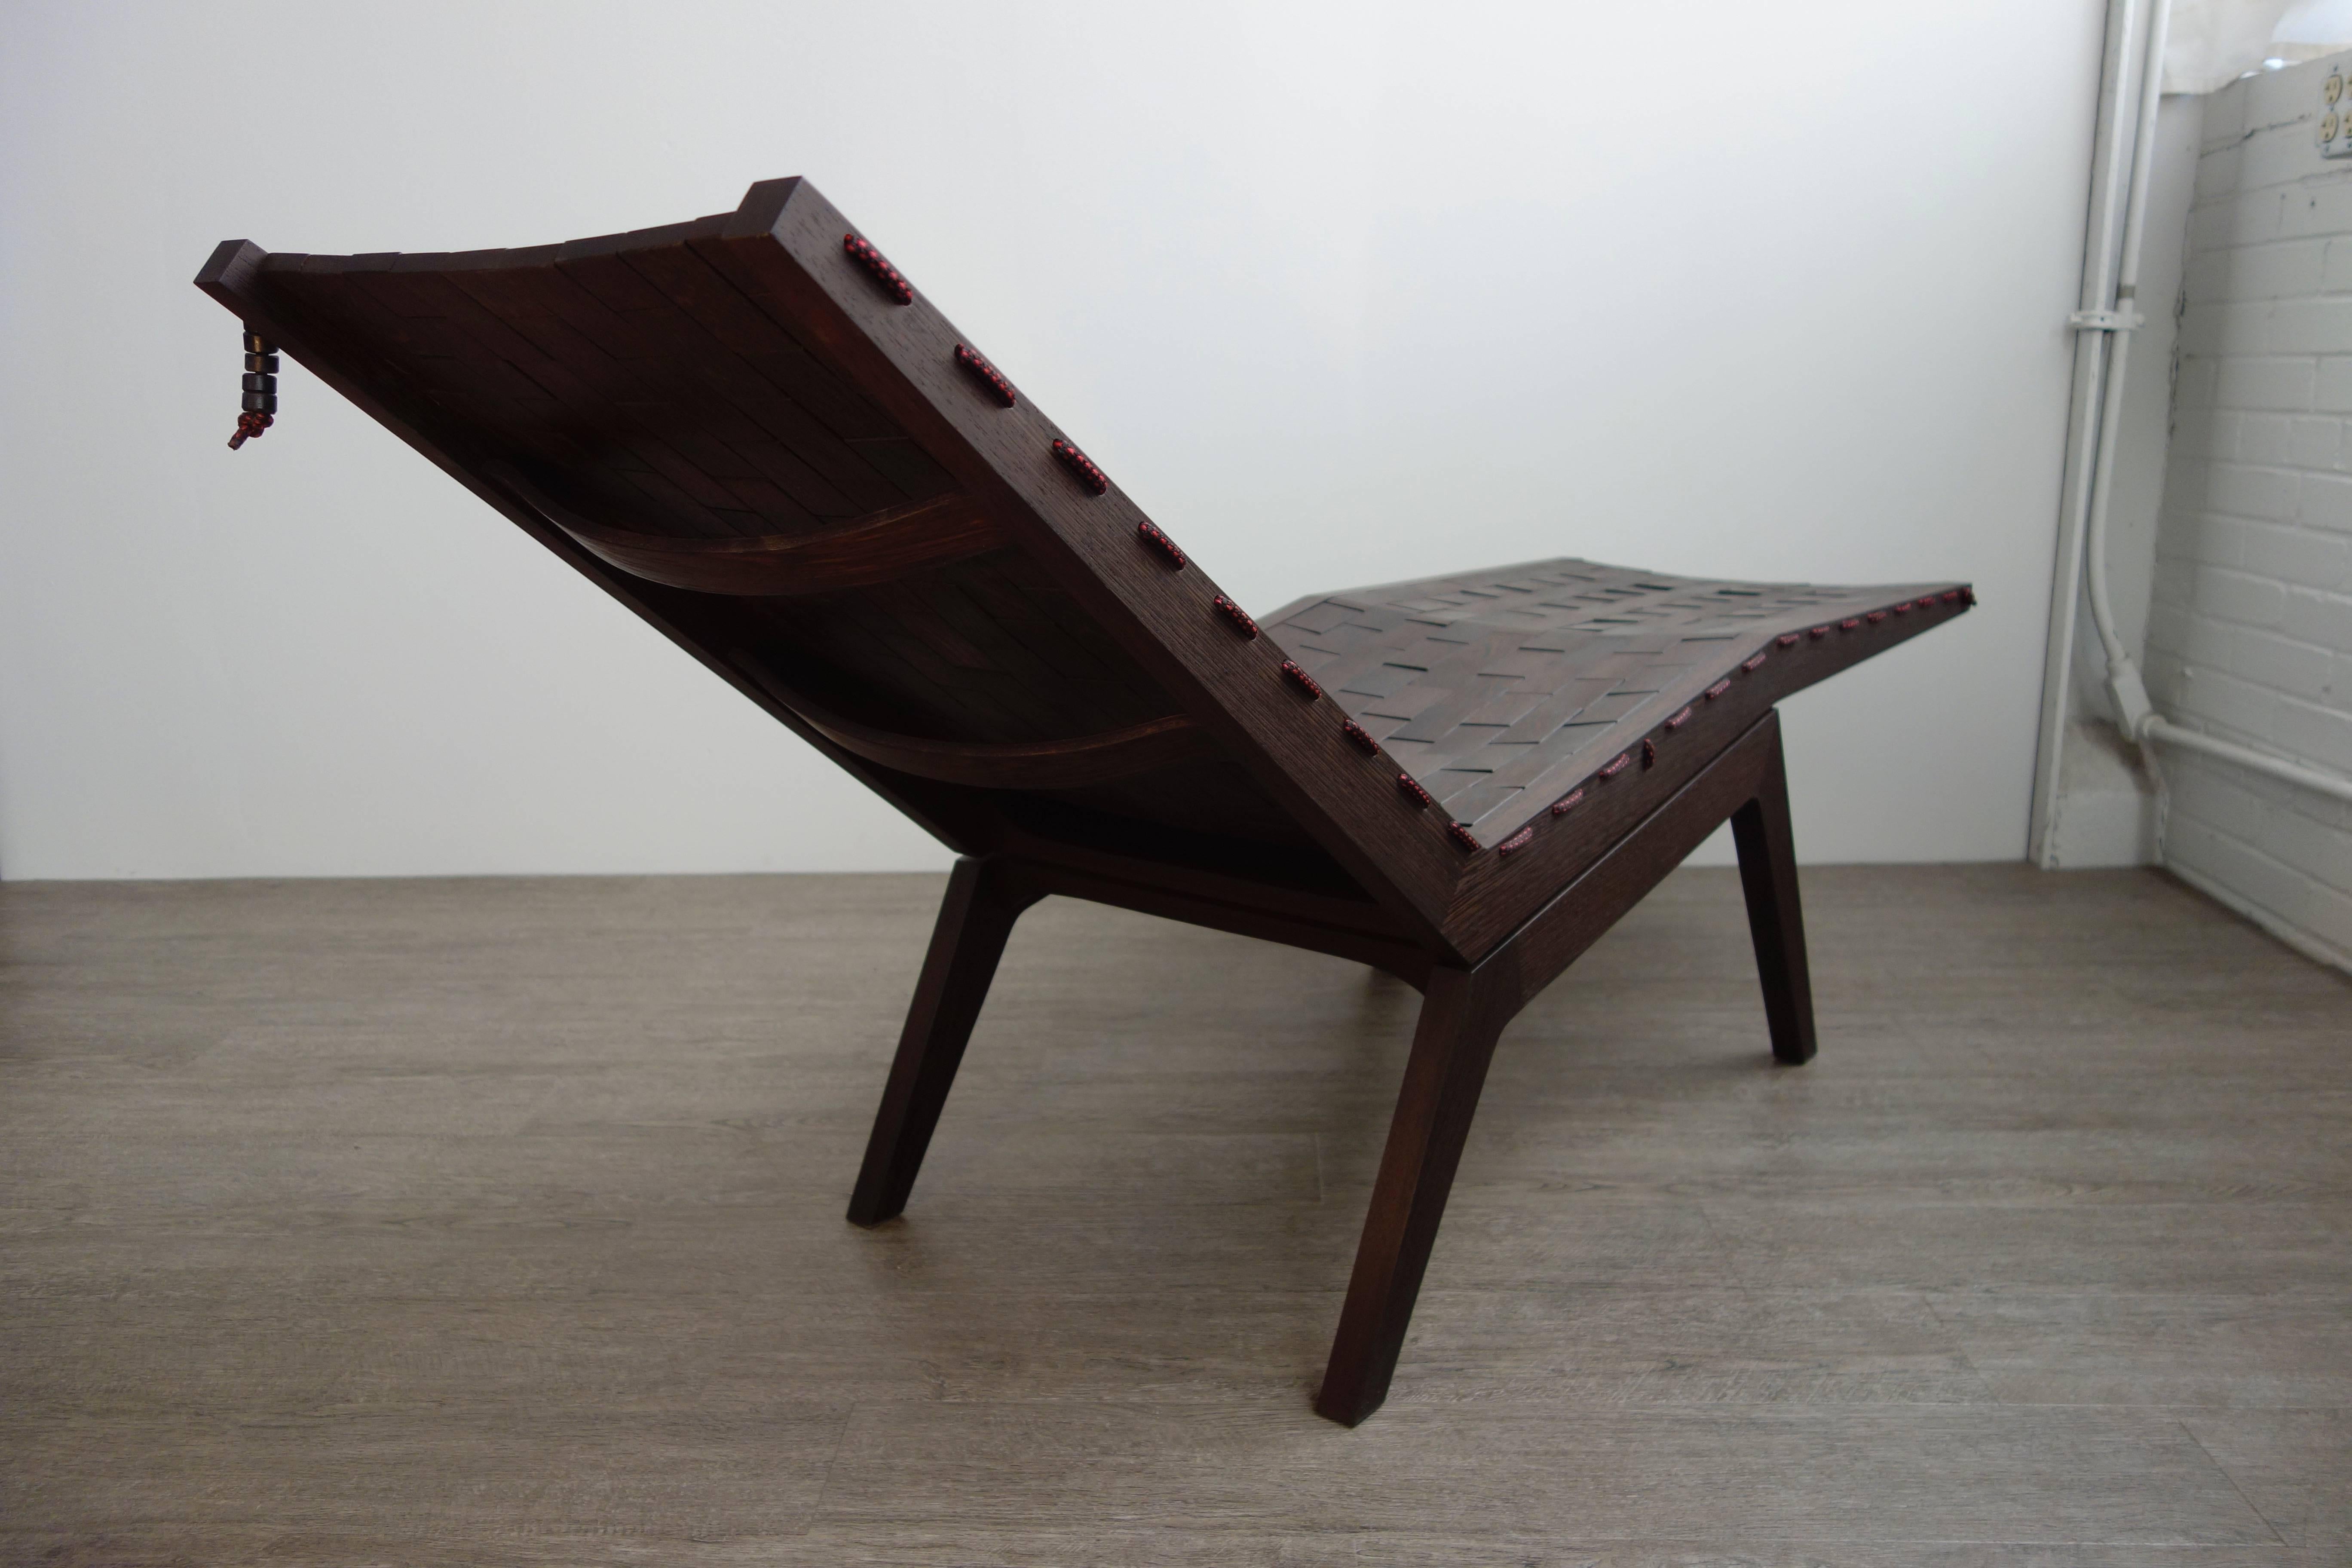 Woodsport RB chaise longue. Named after the running bond pattern in which bricks are laid. 207 individual pieces of wenge, a prized African hardwood, are laced together with high grade polyester rope, creating a flexible surface that forms to the